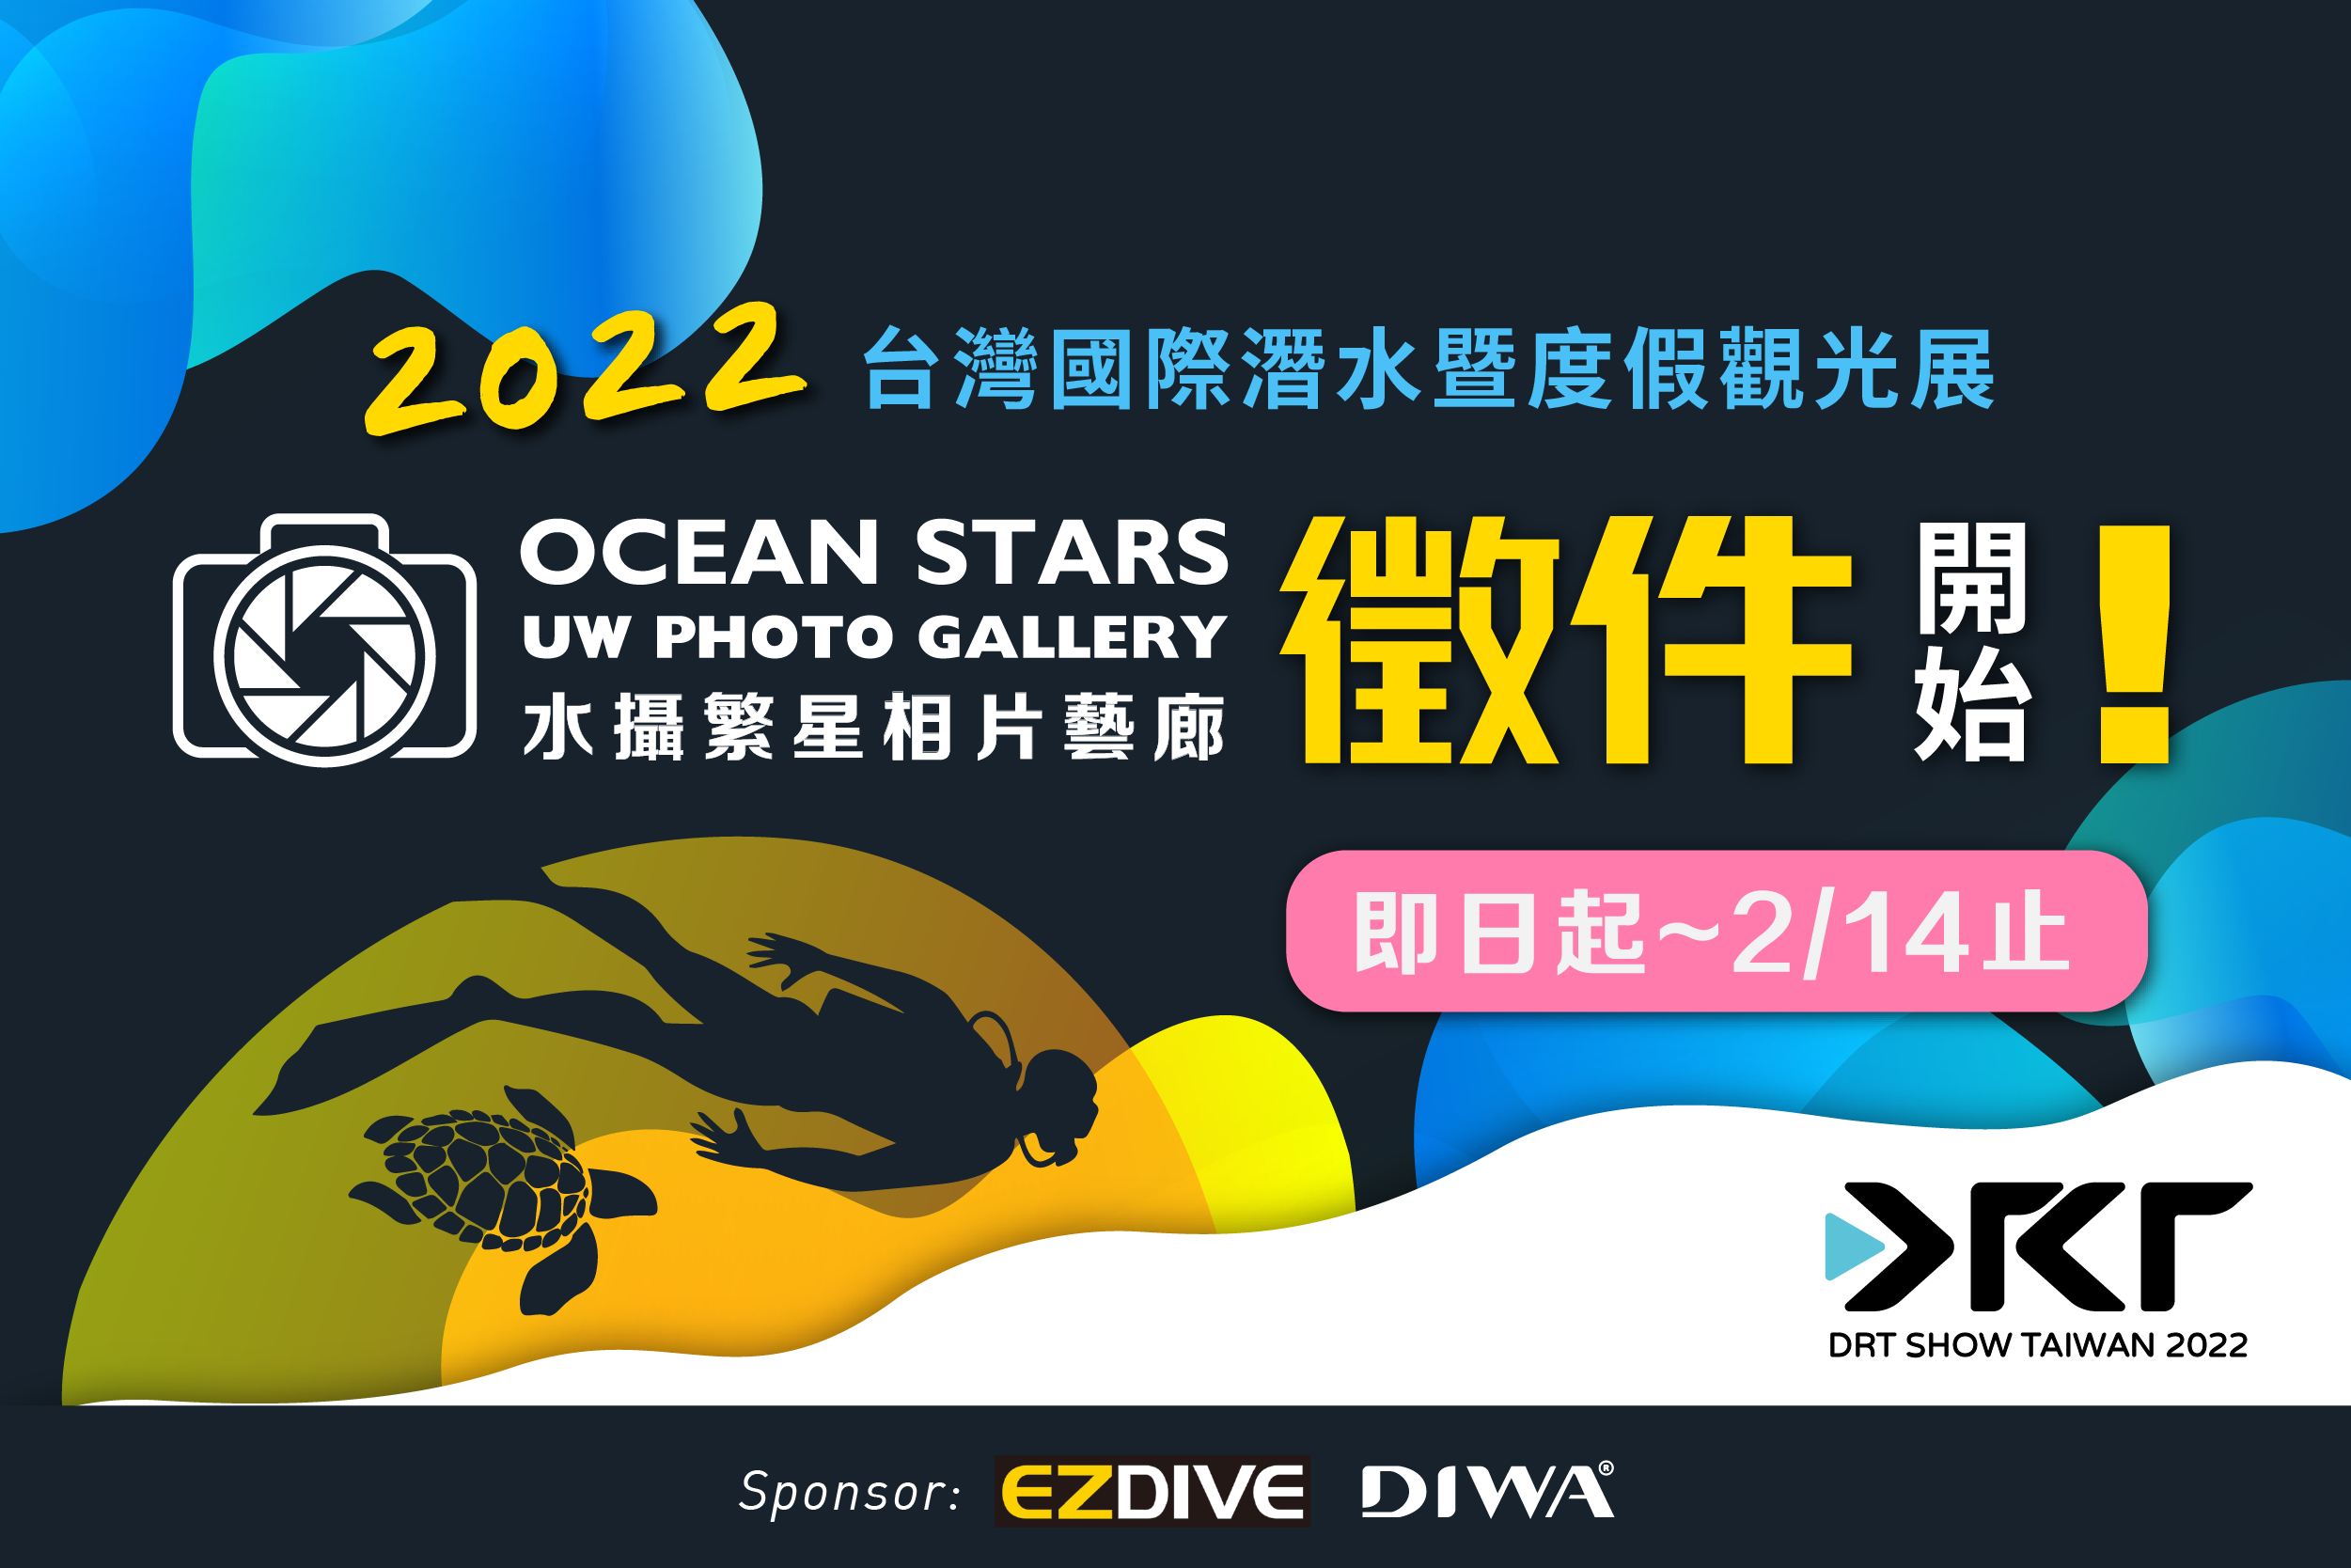 Ocean Stars Underwater Photo Gallery (Taiwan) is Now Calling for Talented Photographers!